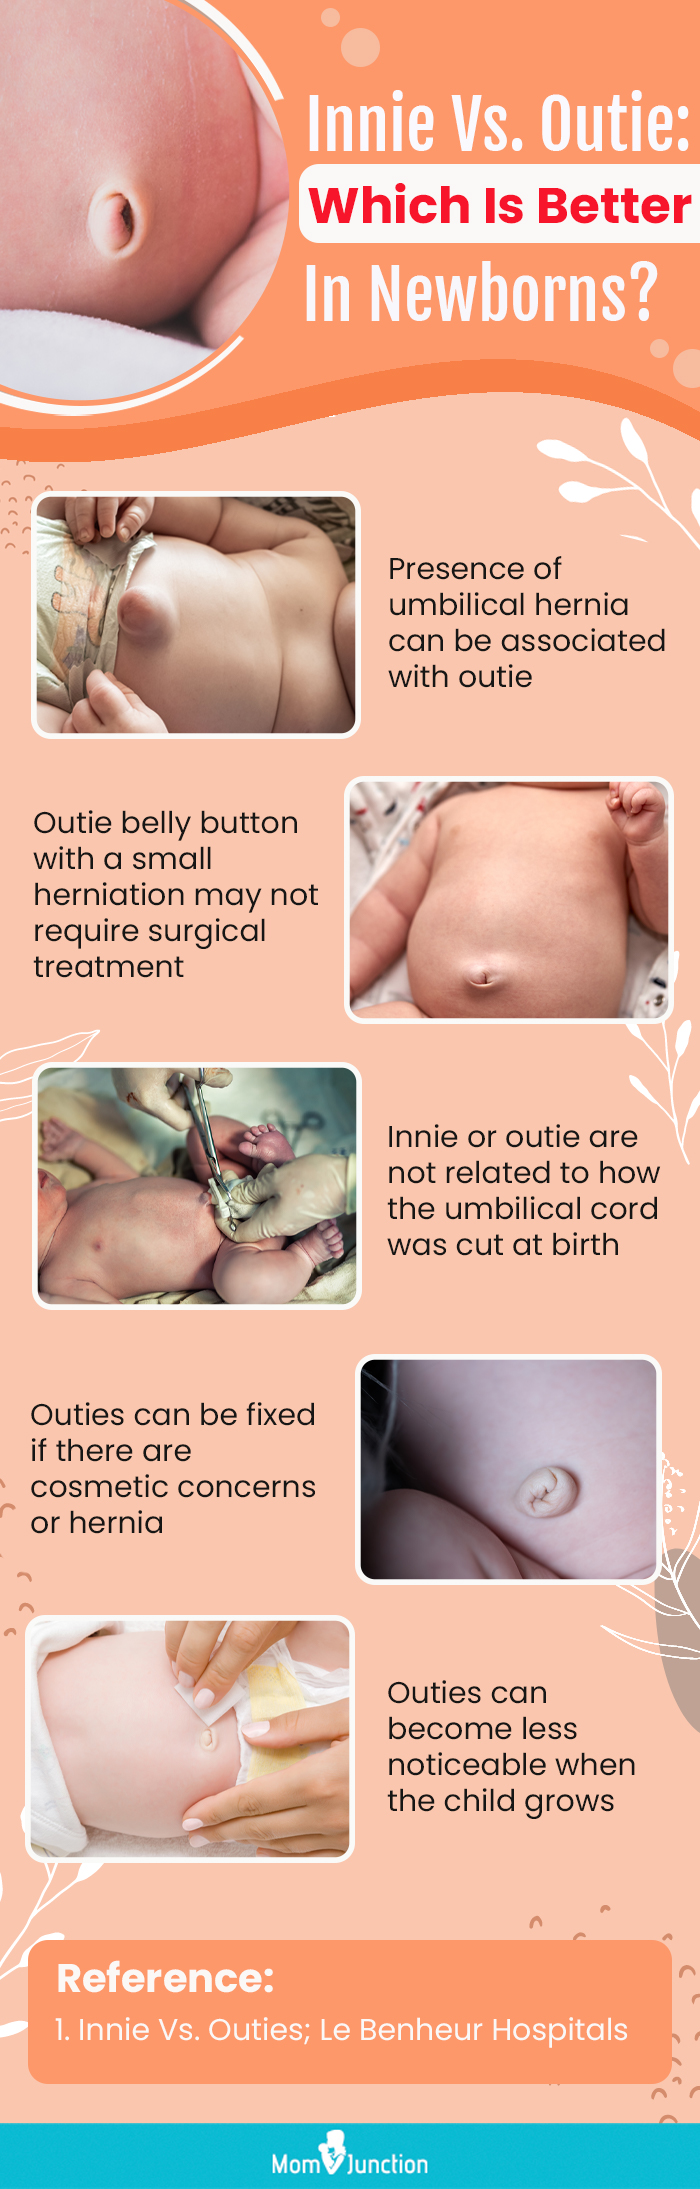 Outie Innie™ Belly Button Cover